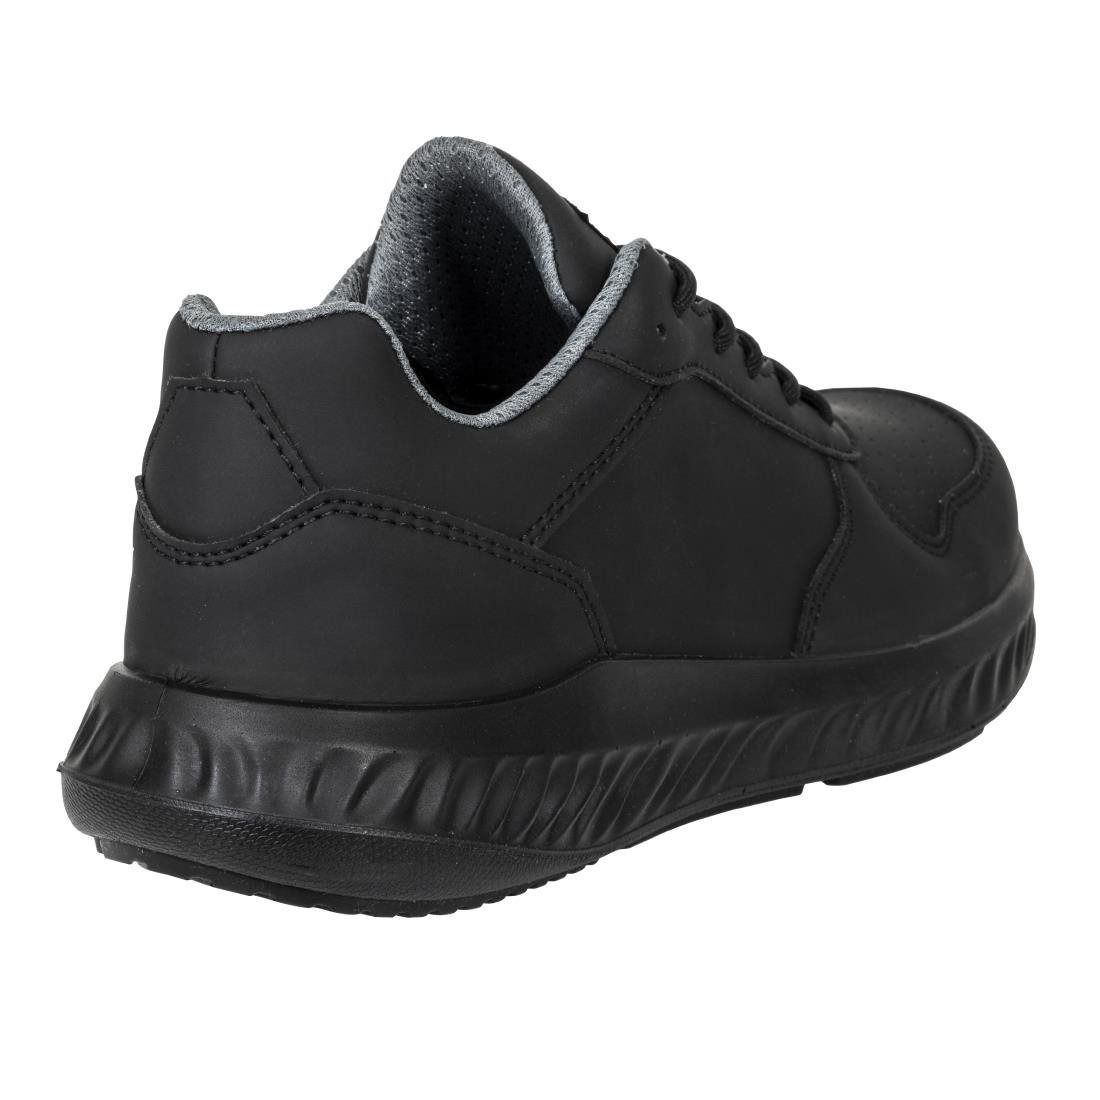 BA063-43 Slipbuster Recycled Microfibre Trainers Matte Black 43 JD Catering Equipment Solutions Ltd